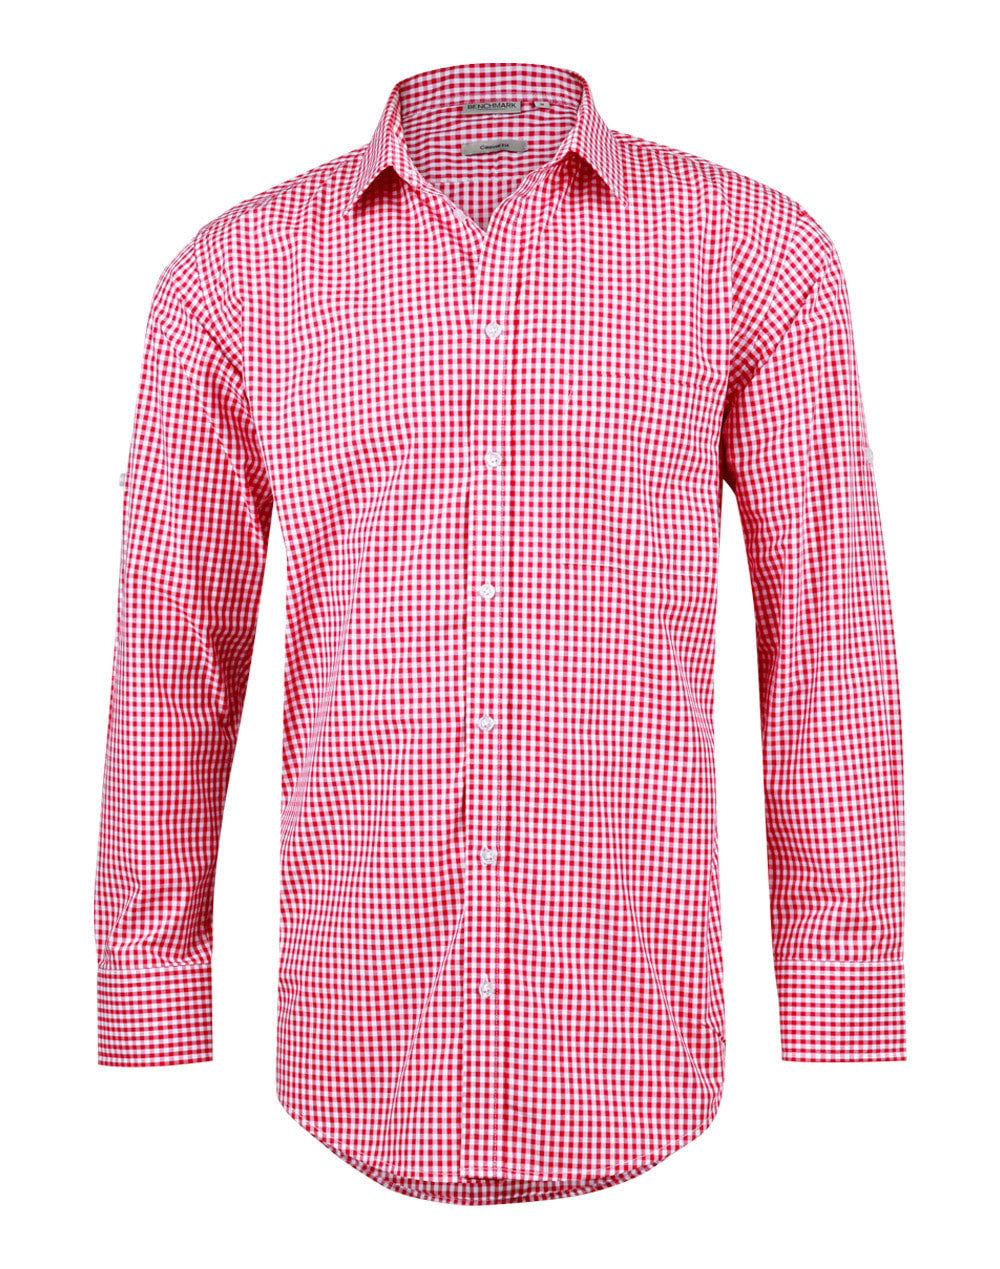 Benchmark M7300L Men’s Gingham Check Long Sleeve Shirt with Roll-up Tab Sleeve